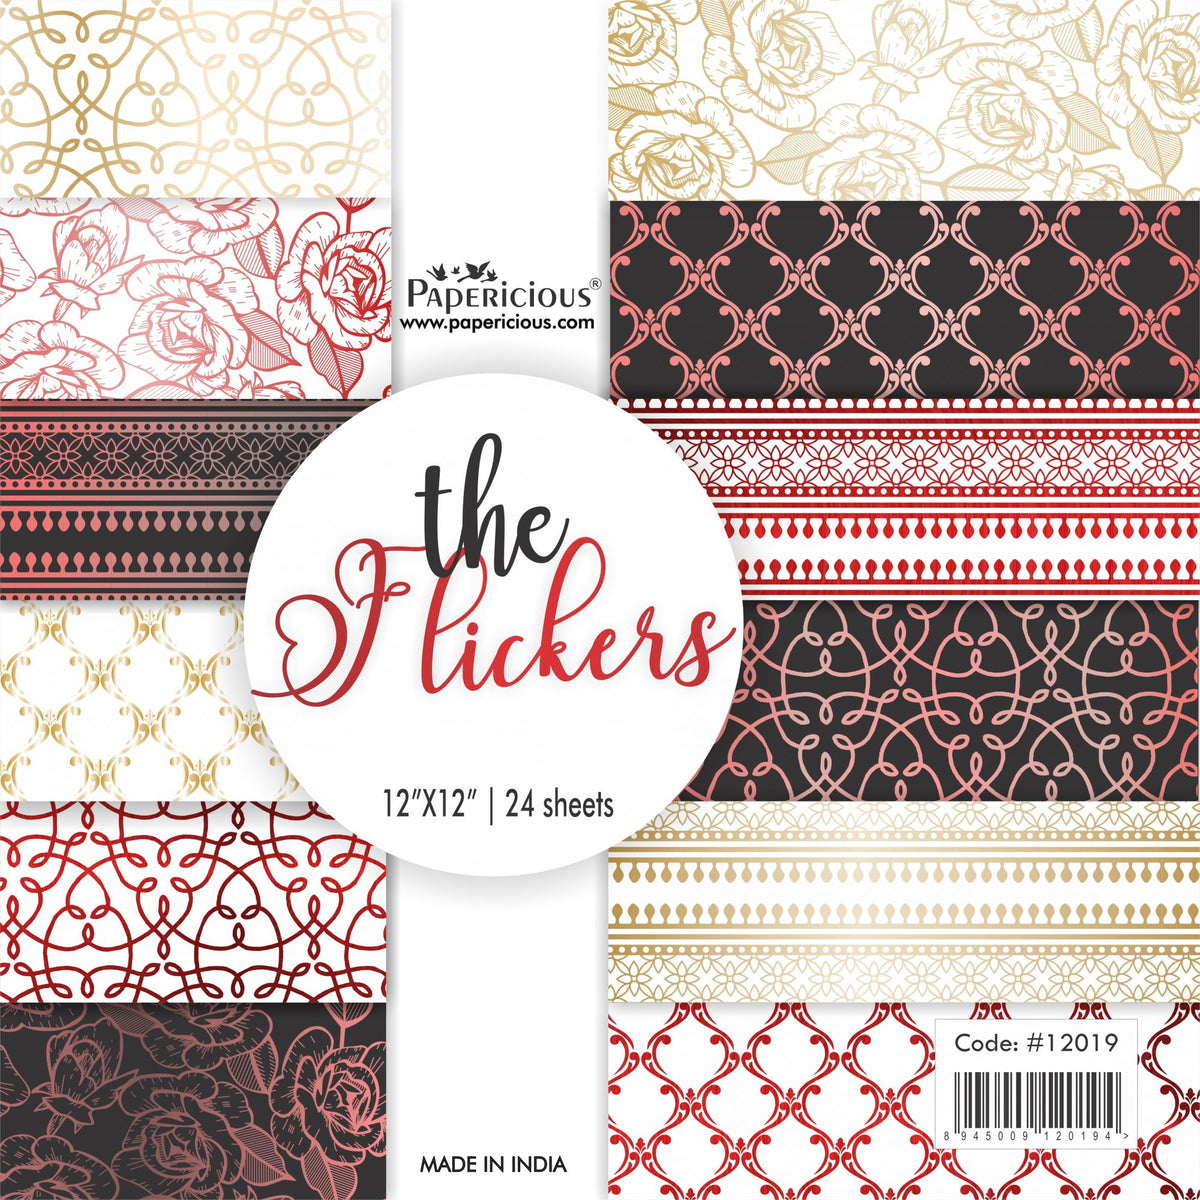 PAPERICIOUS - The Flickers - Golden Rosegold and Red Foiled Designer Pattern Printed Scrapbook Papers 12x12 inch  / 24 sheets